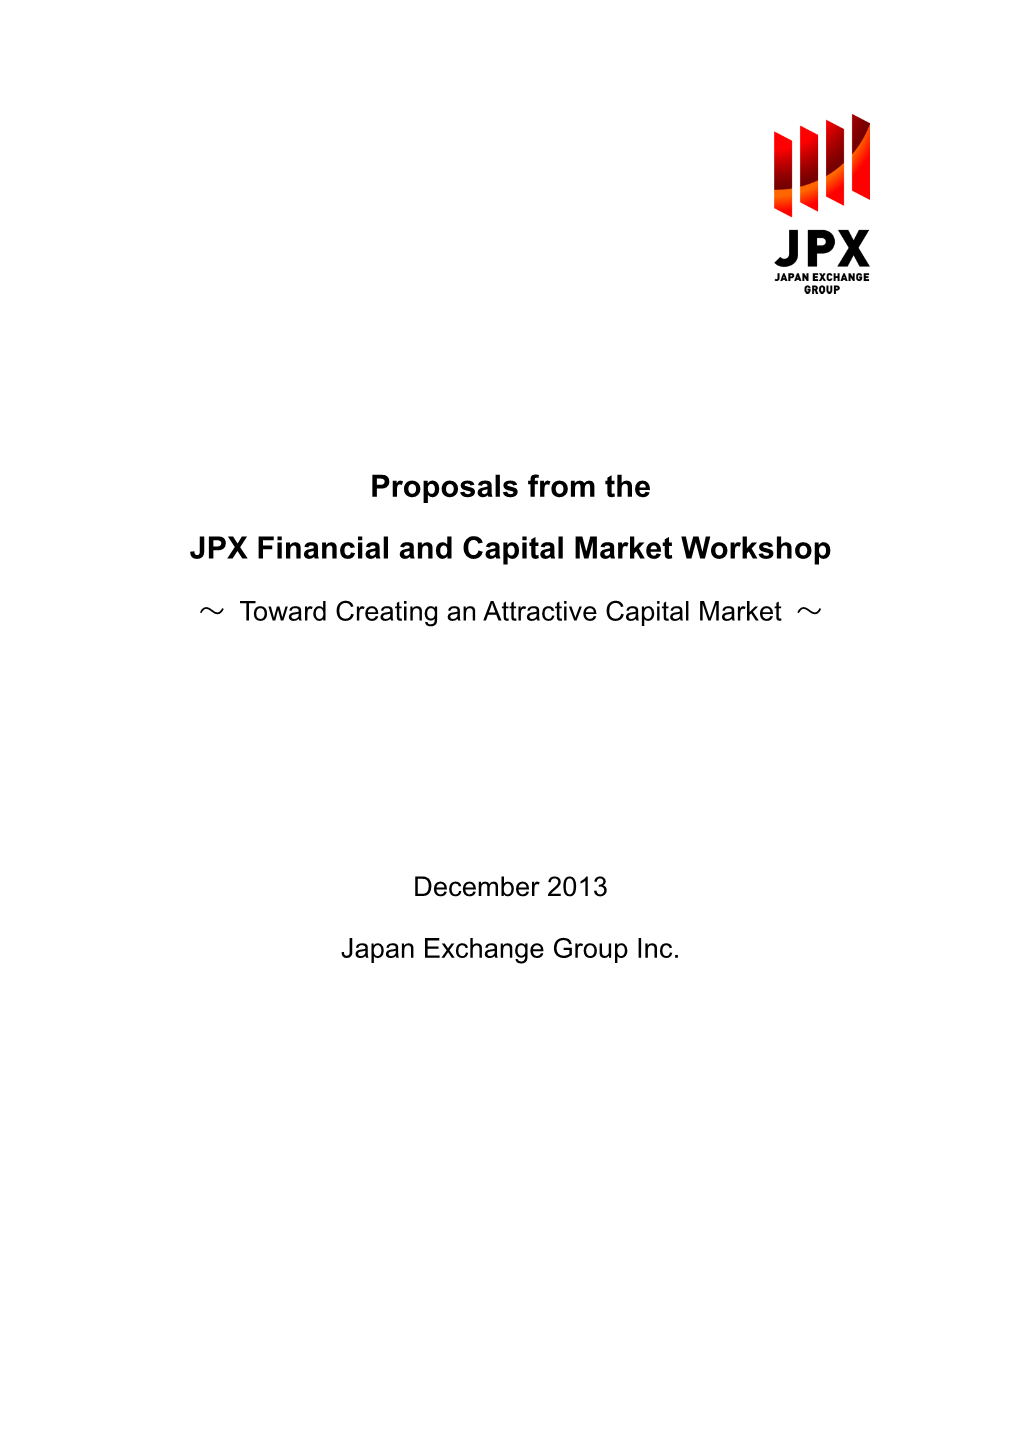 Proposals from the JPX Financial and Capital Market Workshop